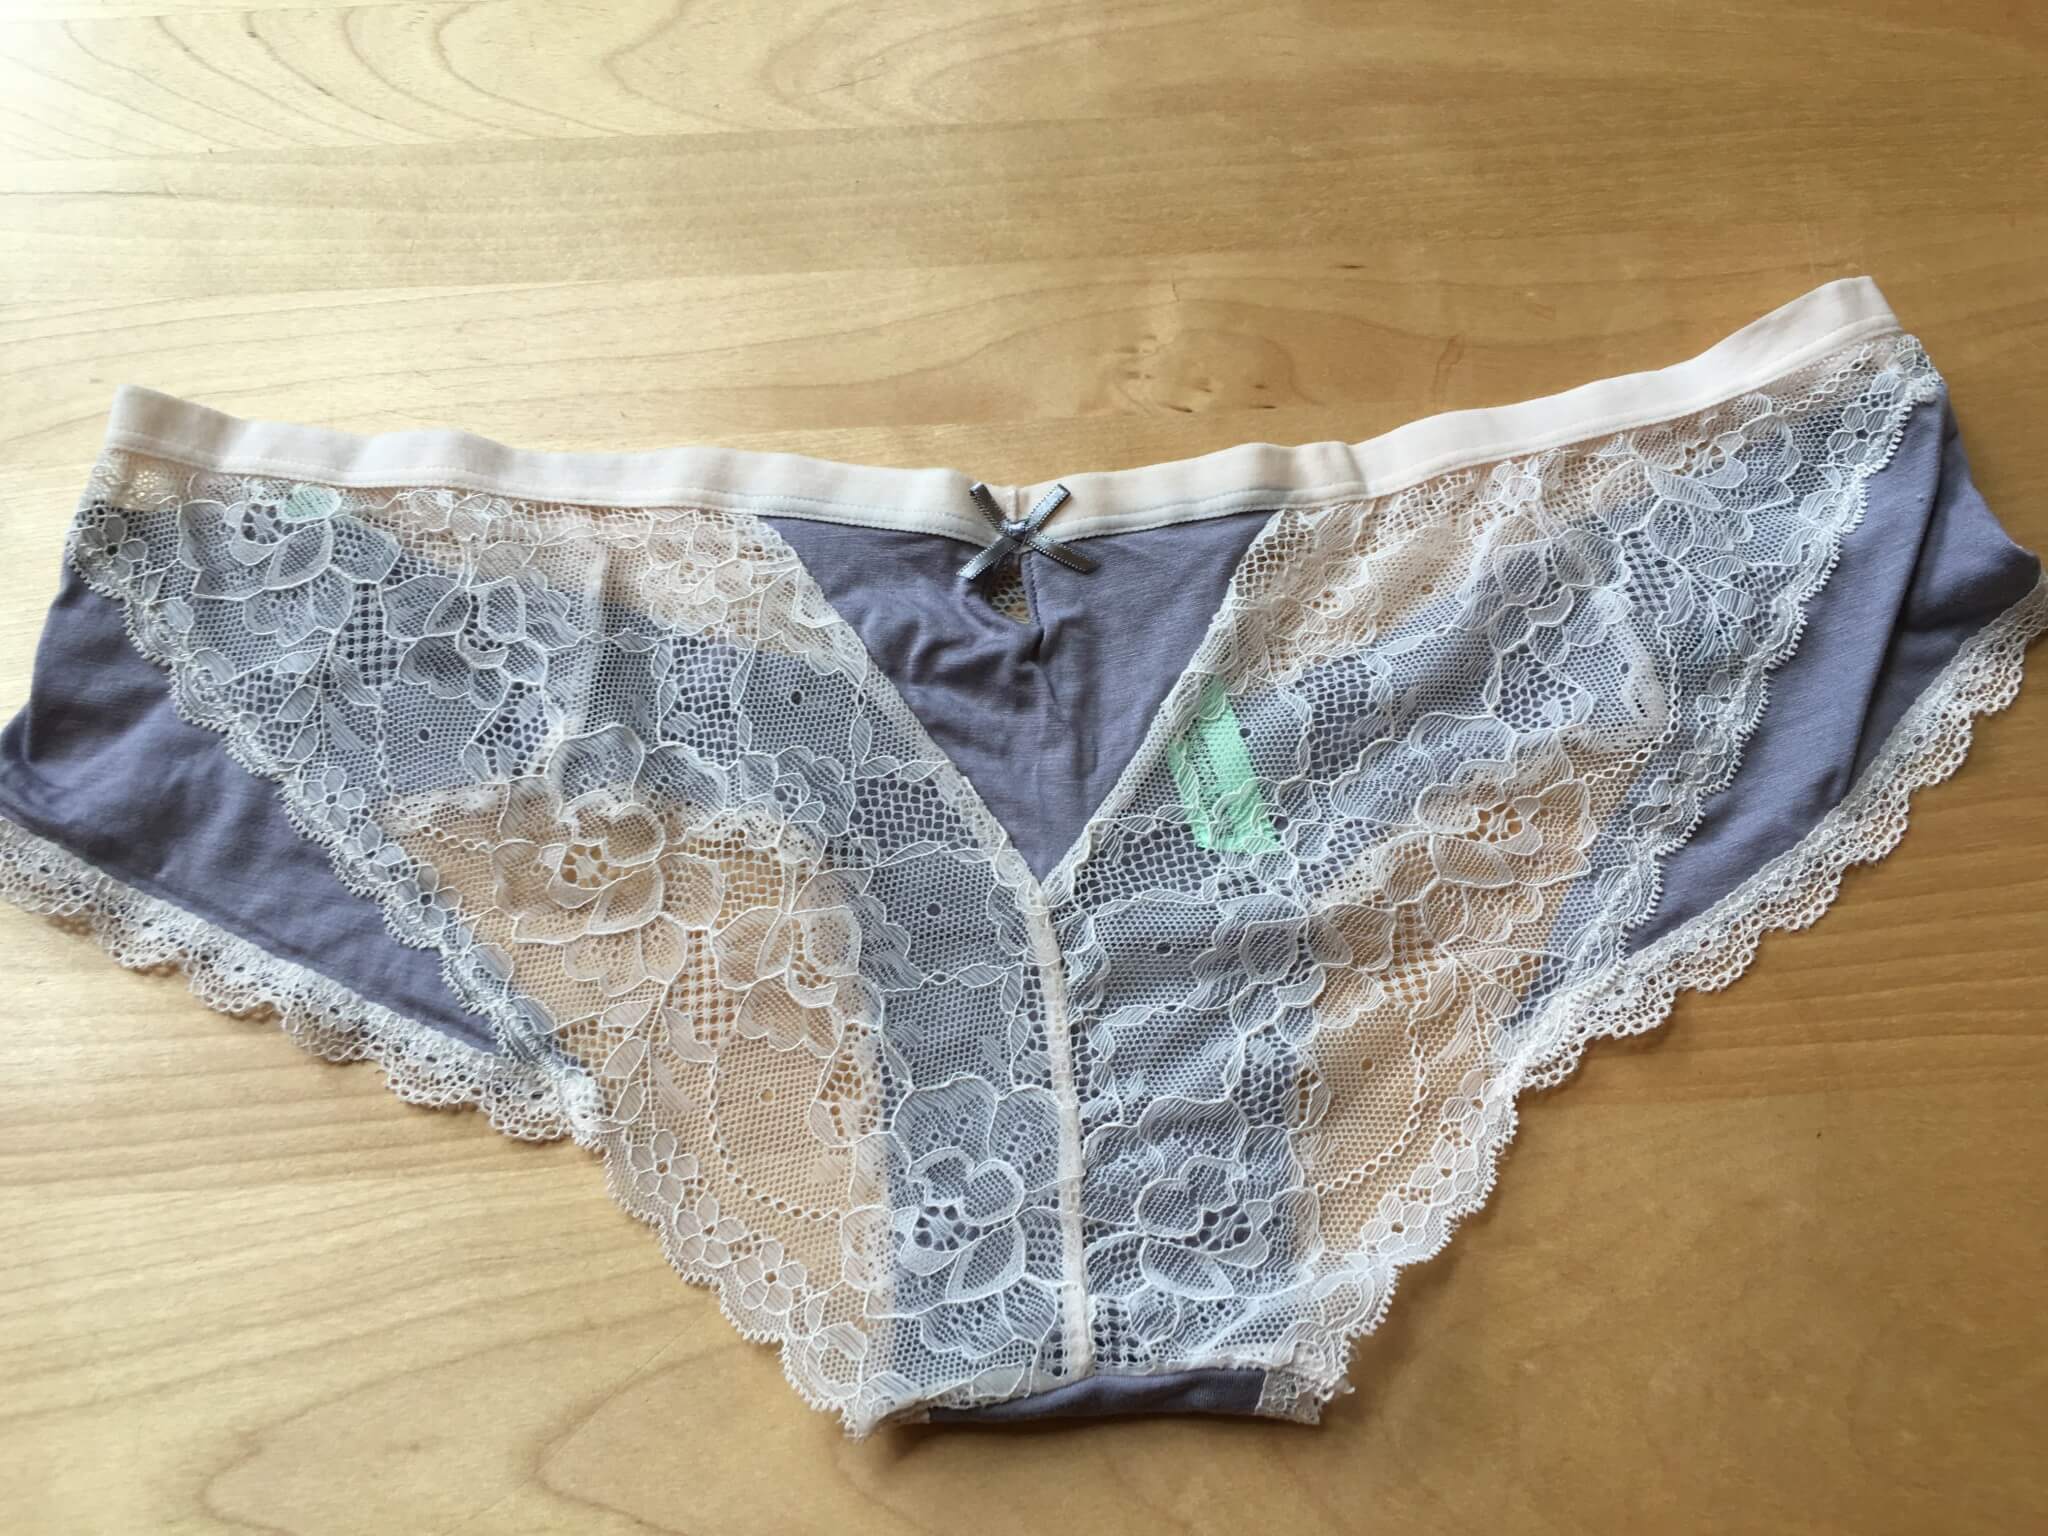 Panty Drop August 2016 Subscription Box Review & Coupon - Hello ...